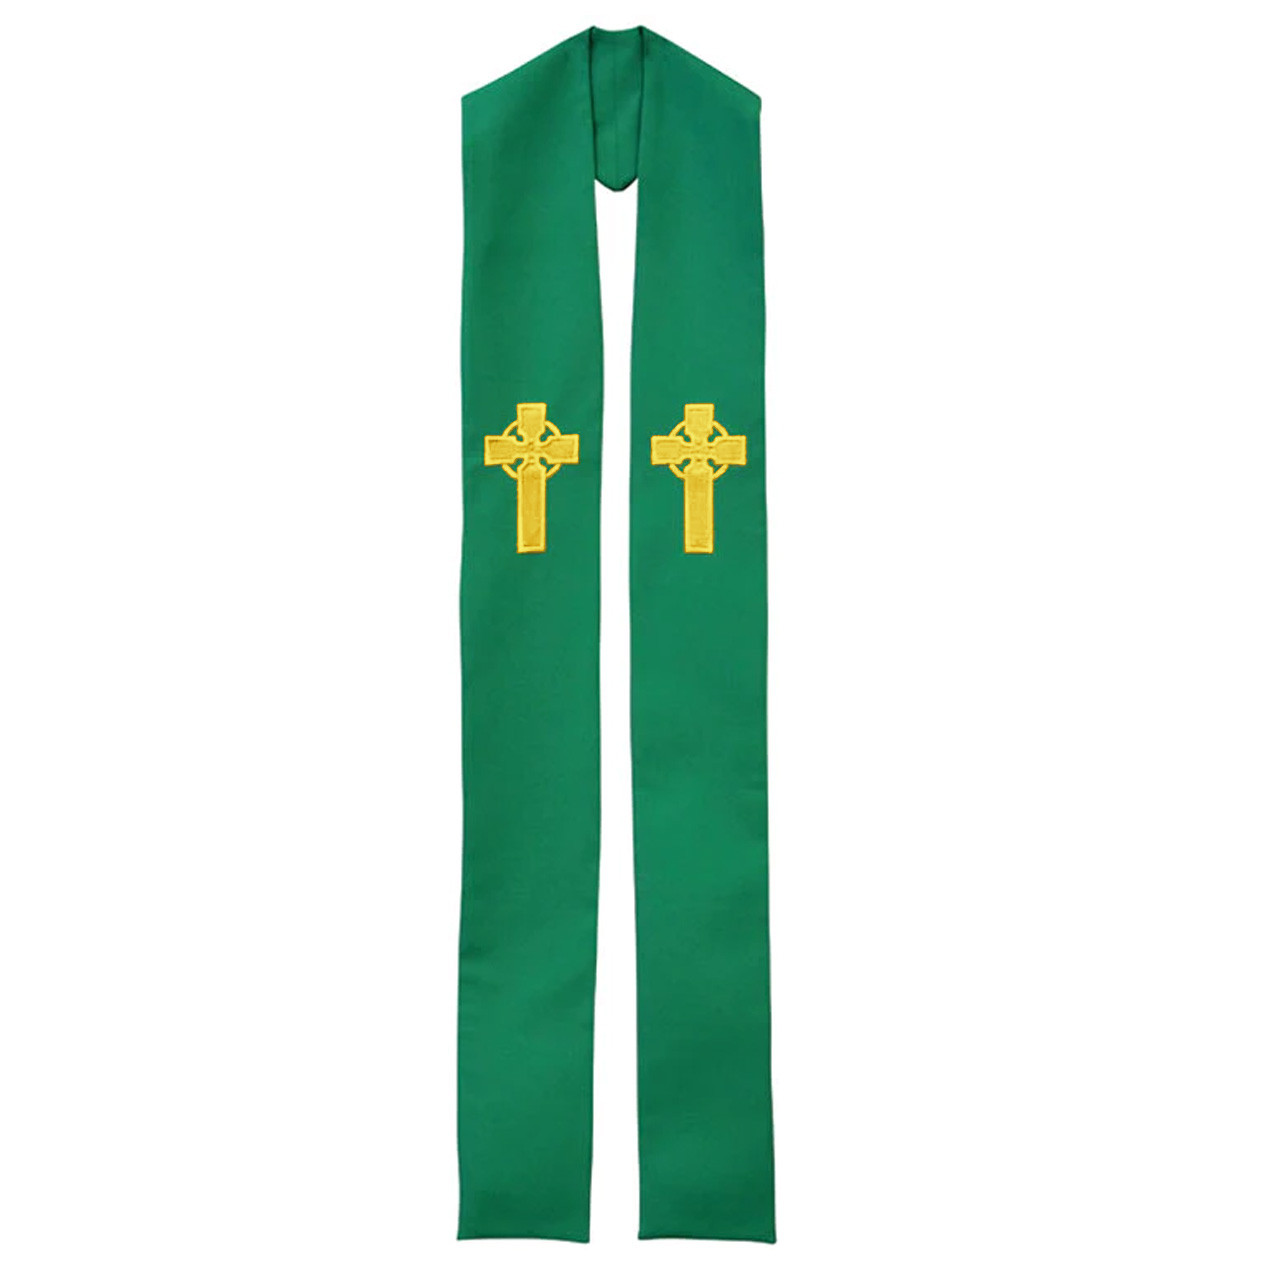 BV 701 Stole with Celtic Cross Design